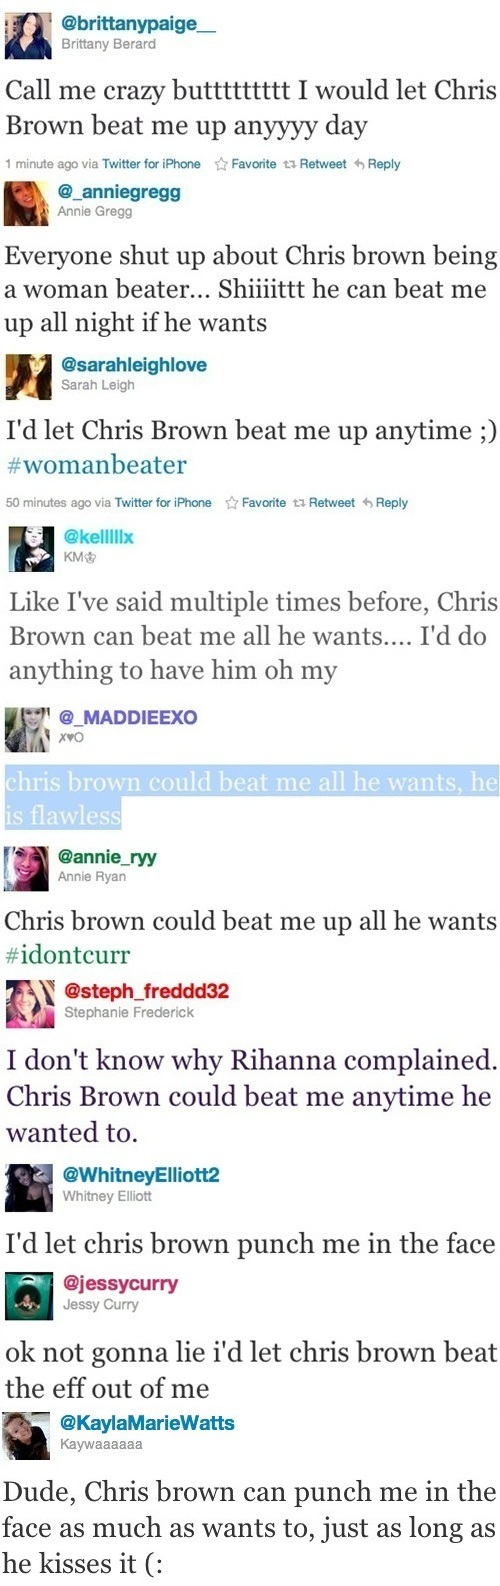 Chris Brown Teaches Women How To Act Right